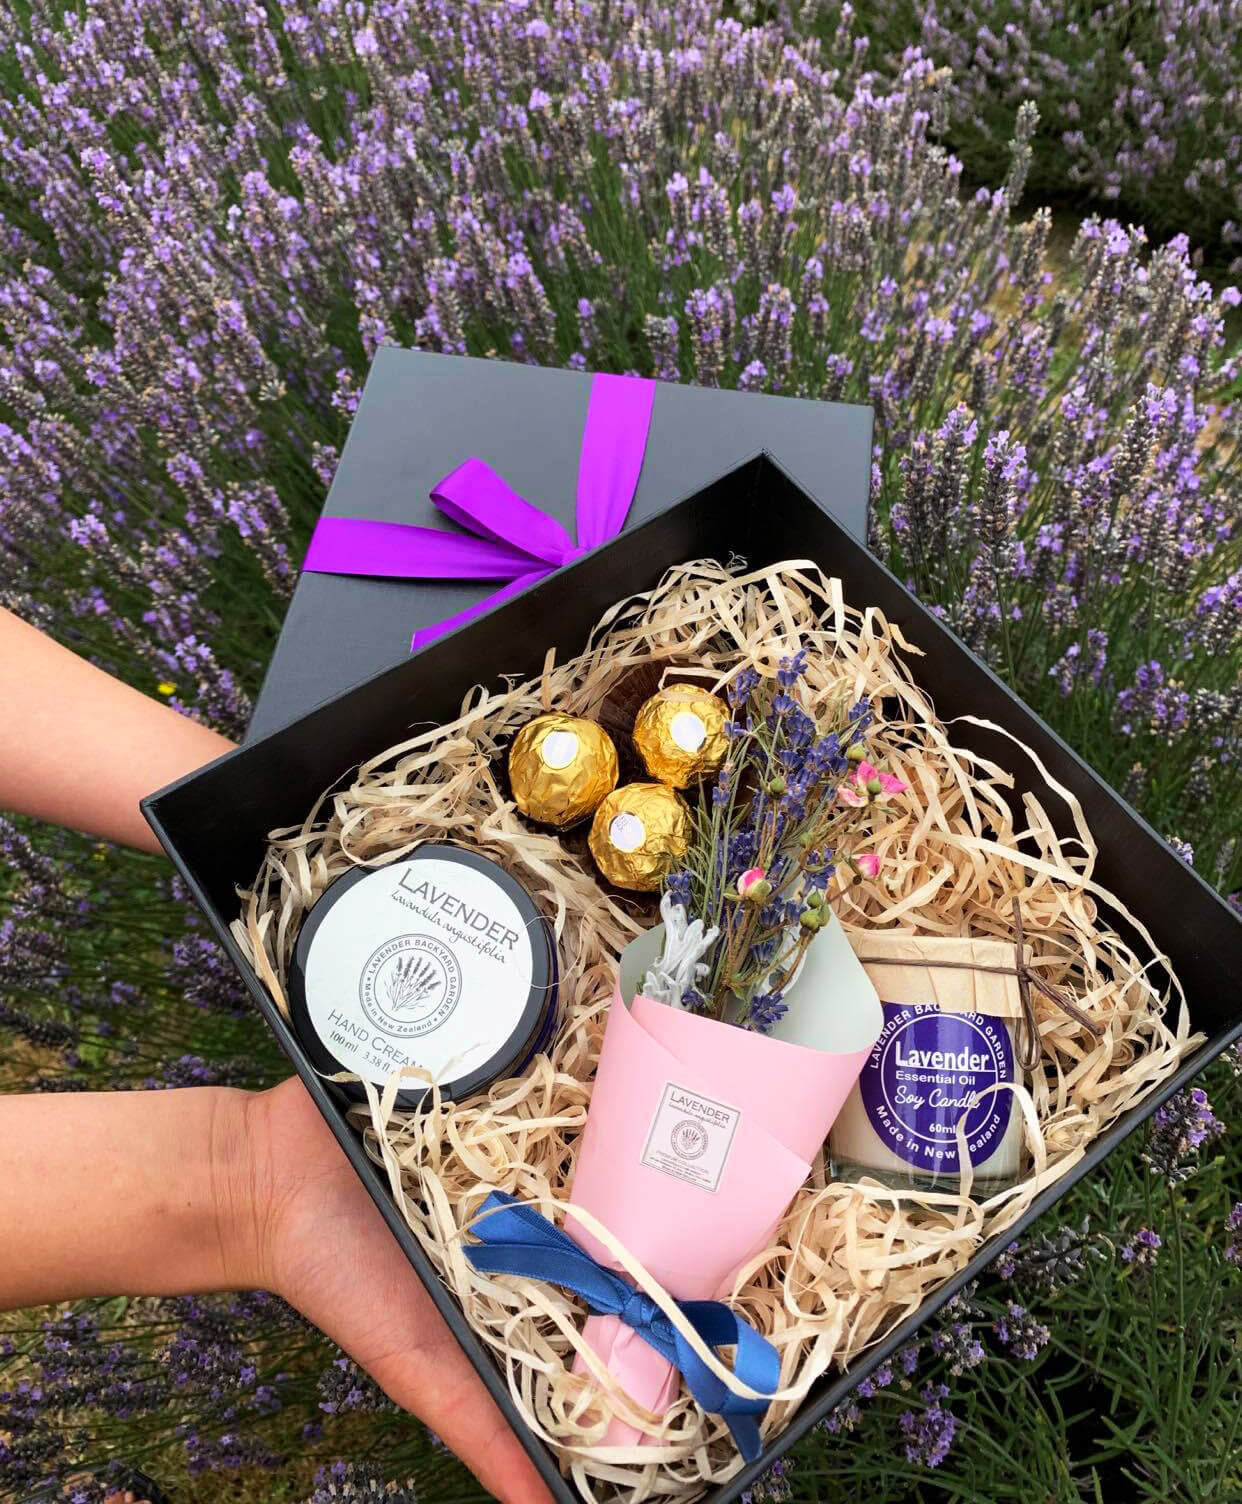 Romantic Gift Box for Valentine's Day, gift set containing soy candle scented by essential oil, hand cream and mini dried flower bouquet from NZ lavender farm